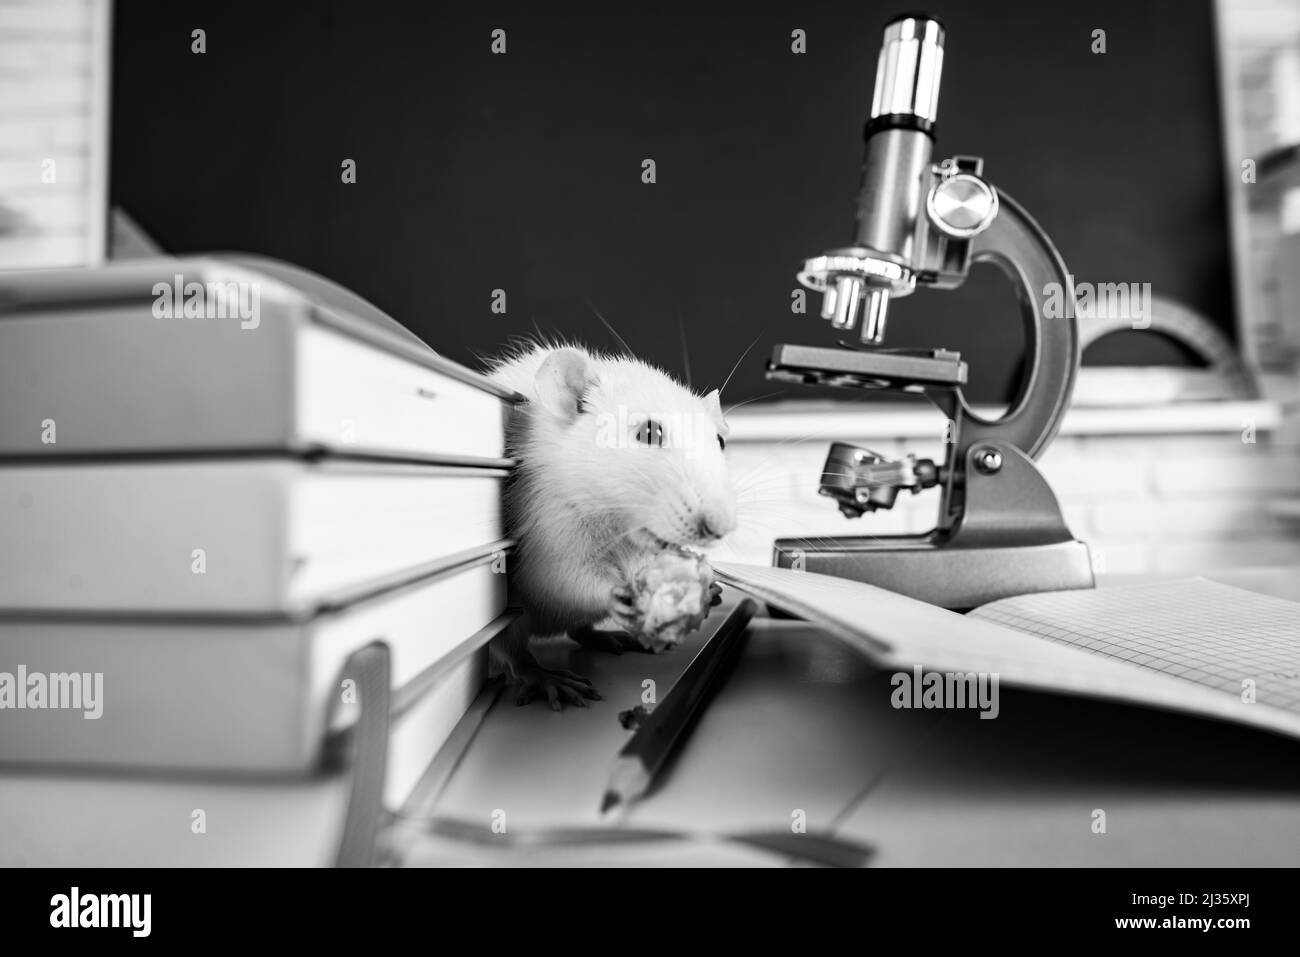 Design for book library, learning, education. Concept for university college or school. Funny rat student. Stock Photo